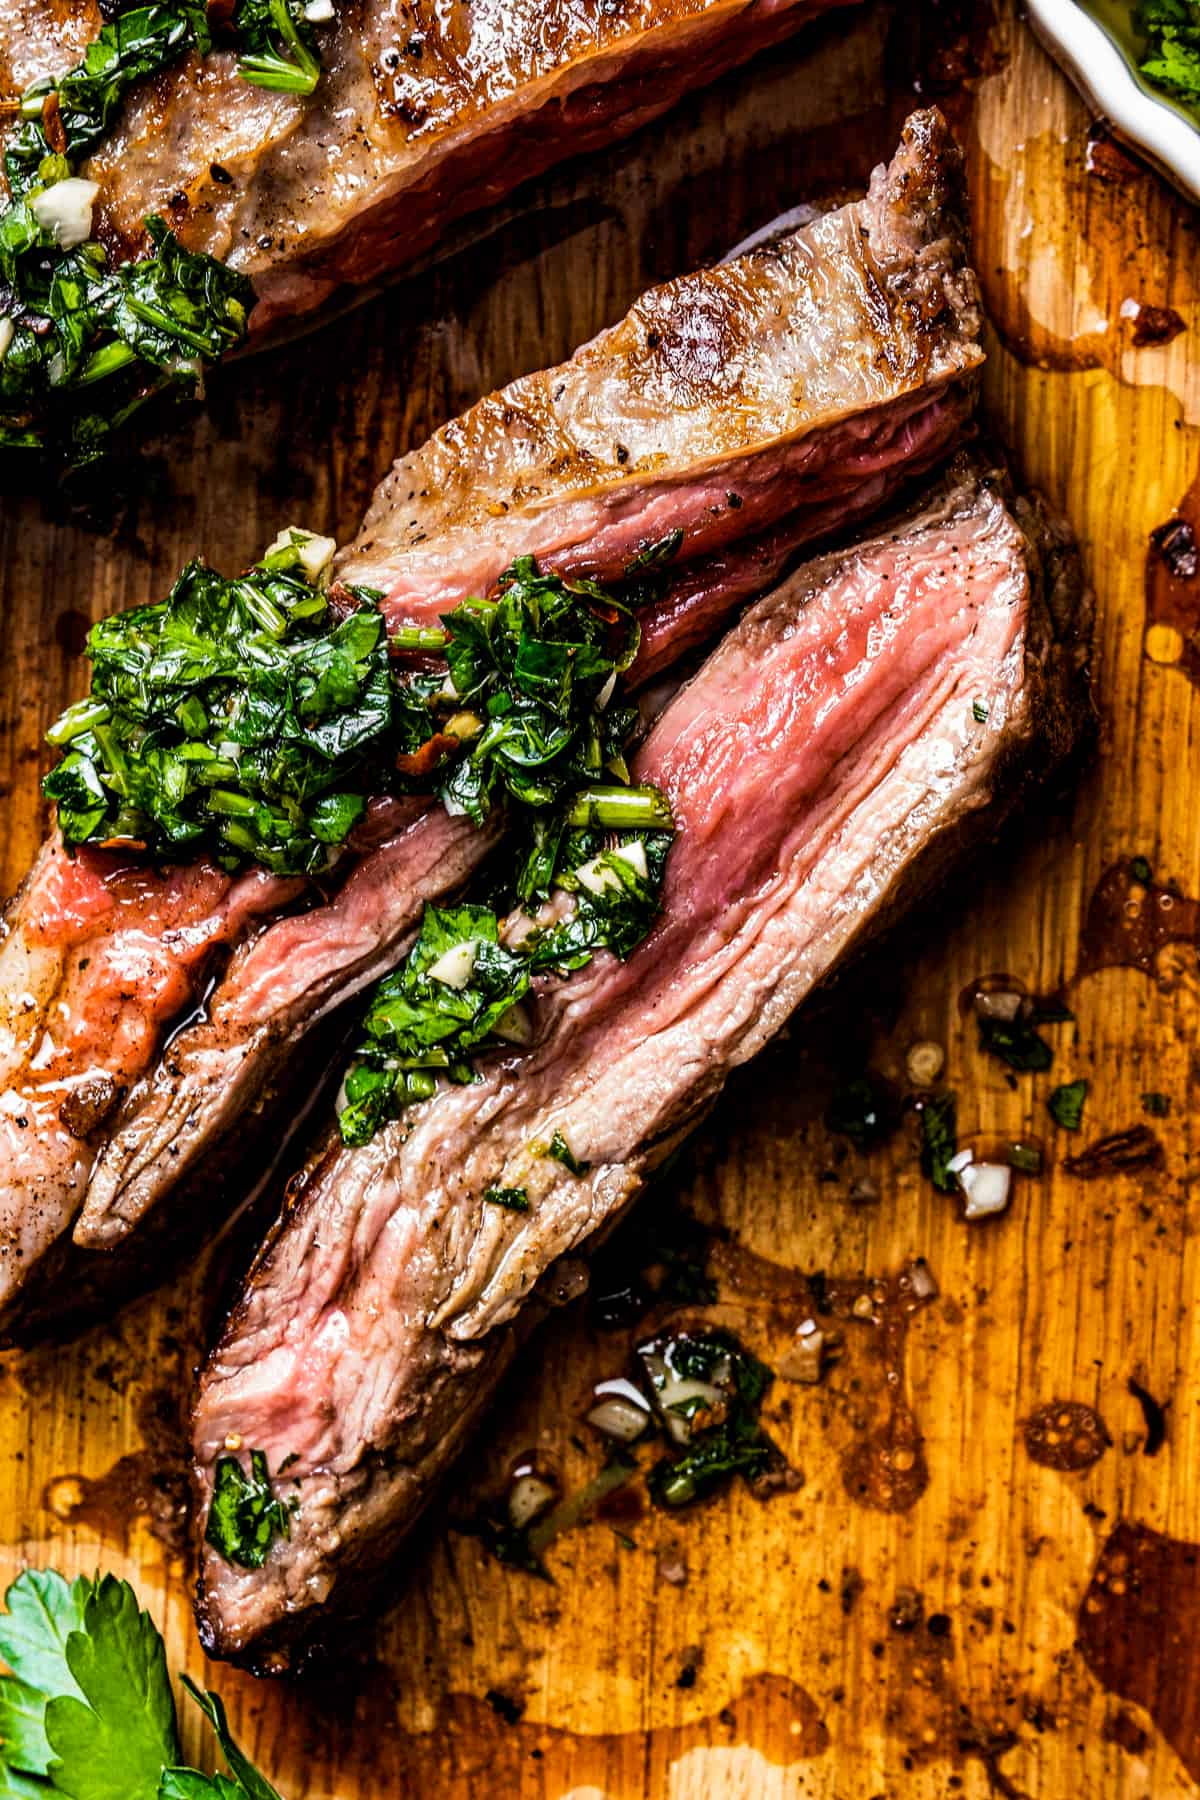 Closeup of churrasco steak on a cutting board, topped with greens.